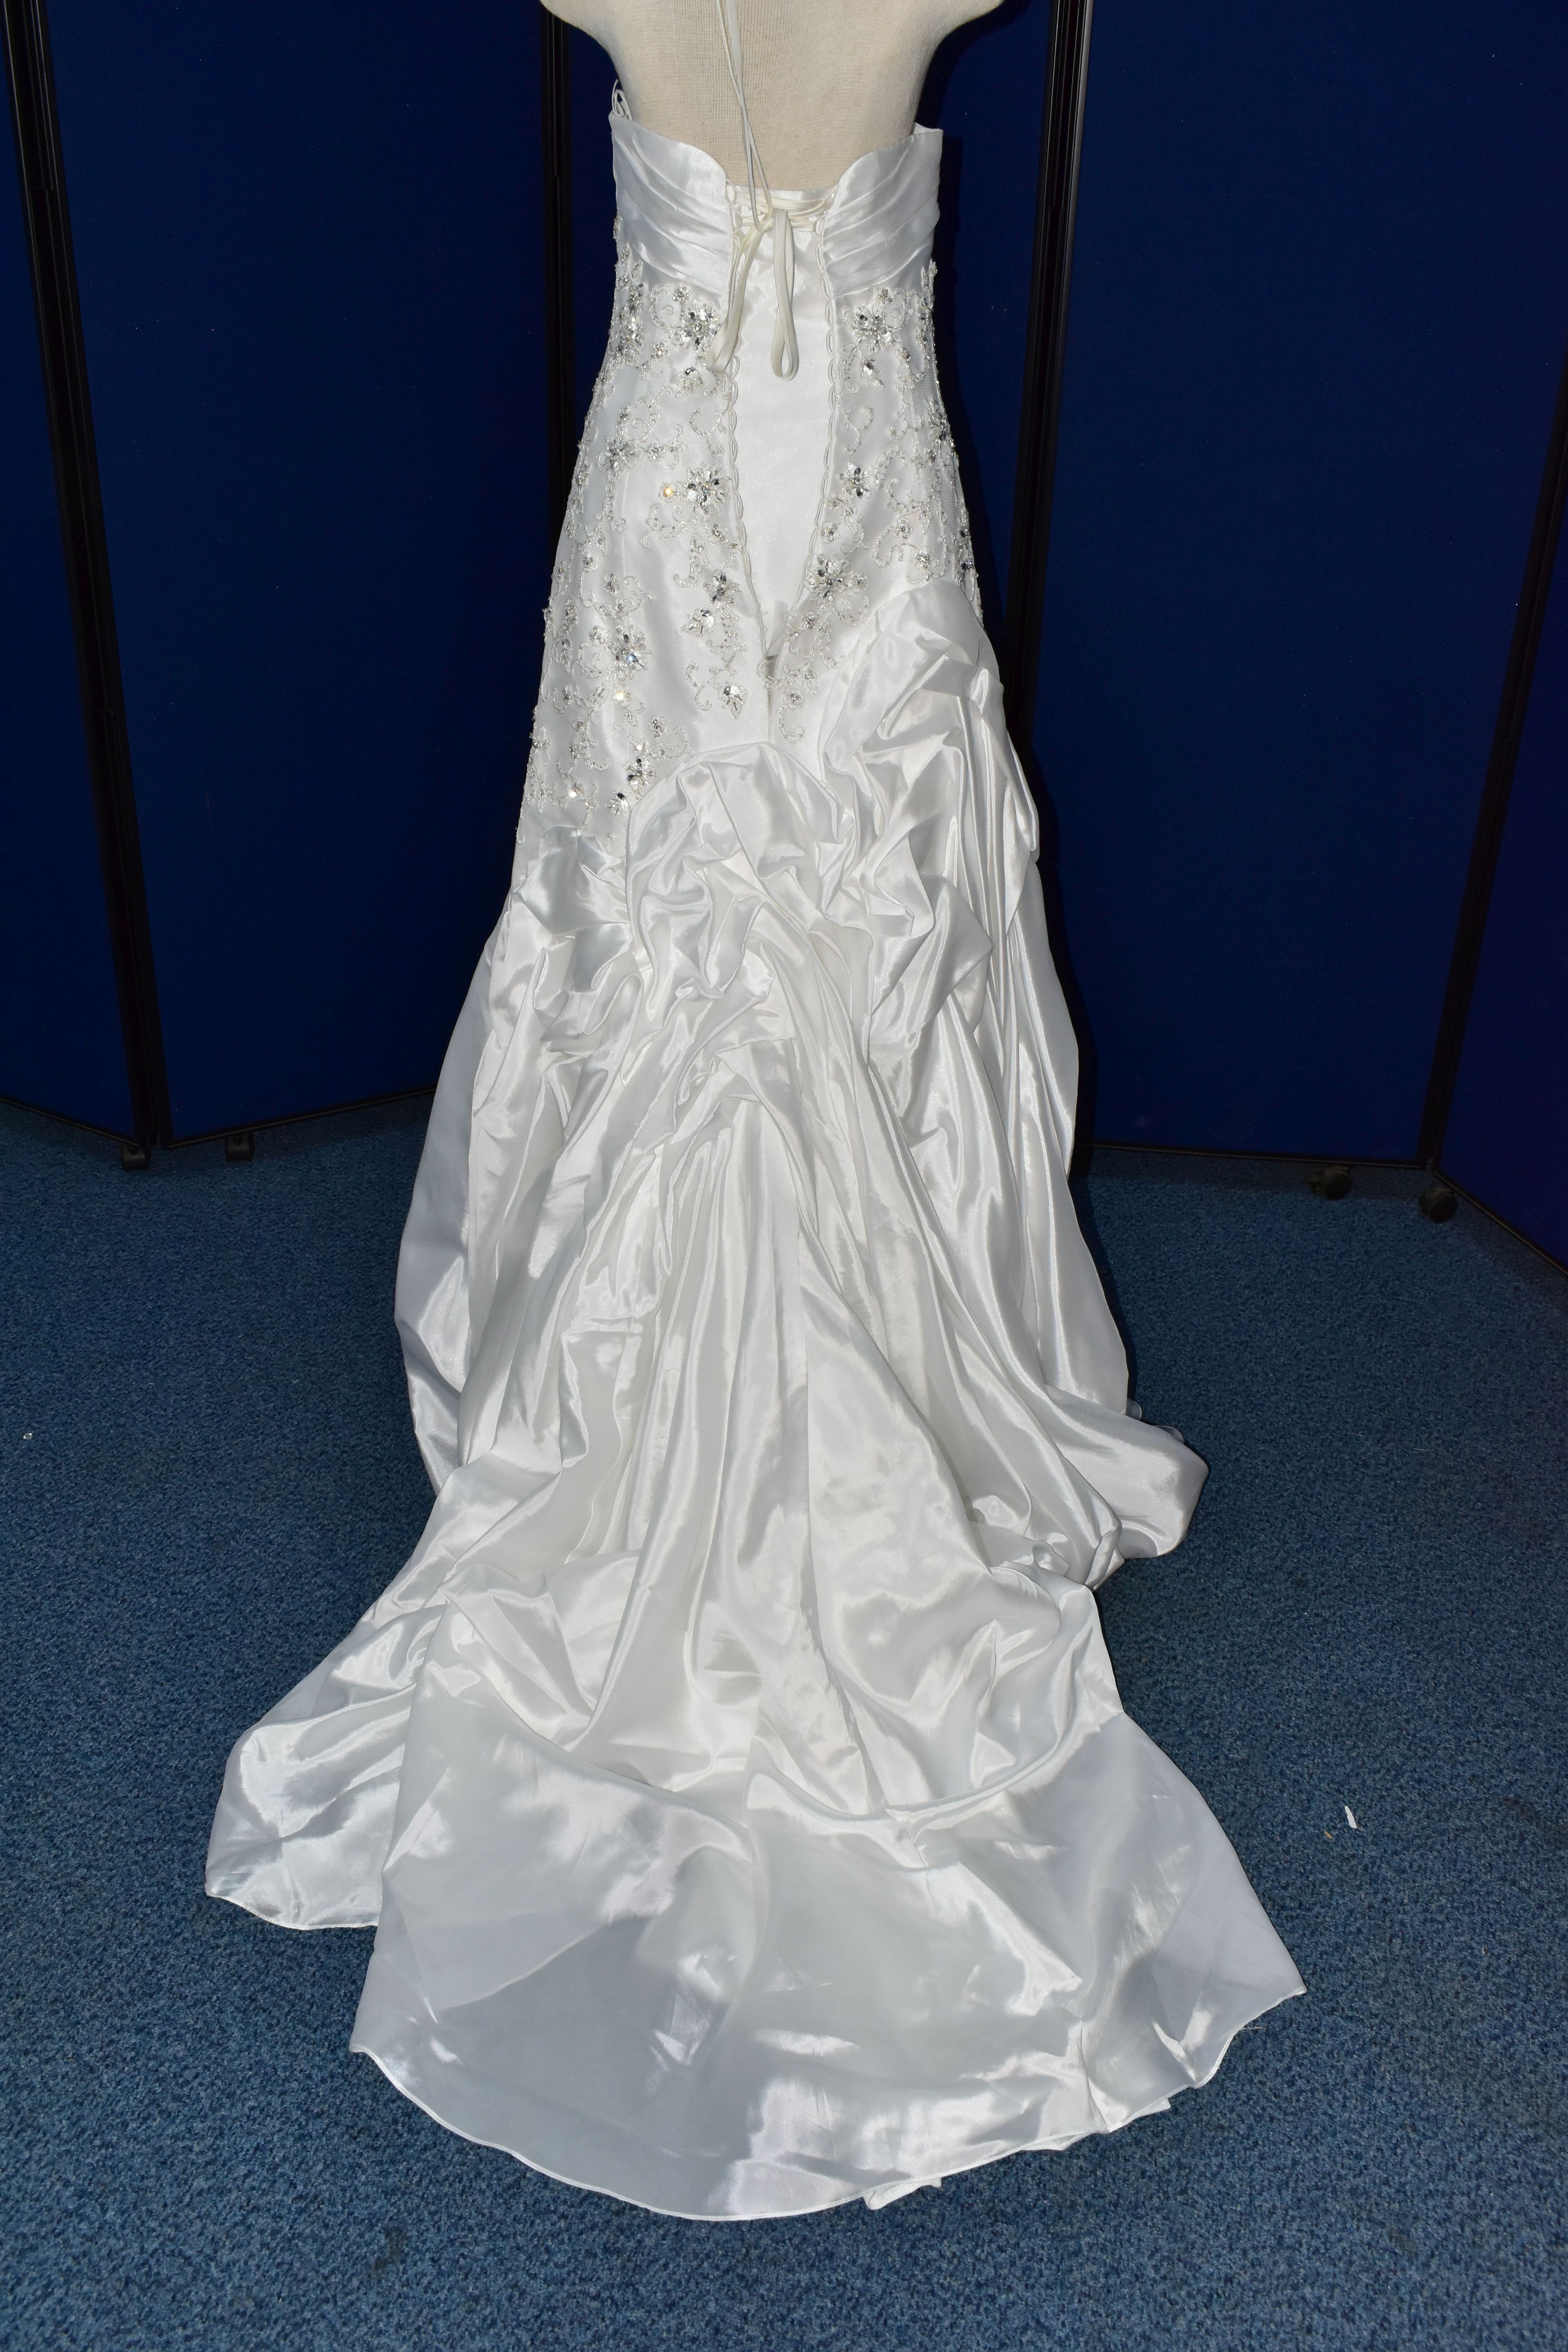 WEDDING GOWN, 'Sophia Tolli' white satin, size 8, strapless, ruched skirt, beaded detail on - Image 13 of 17